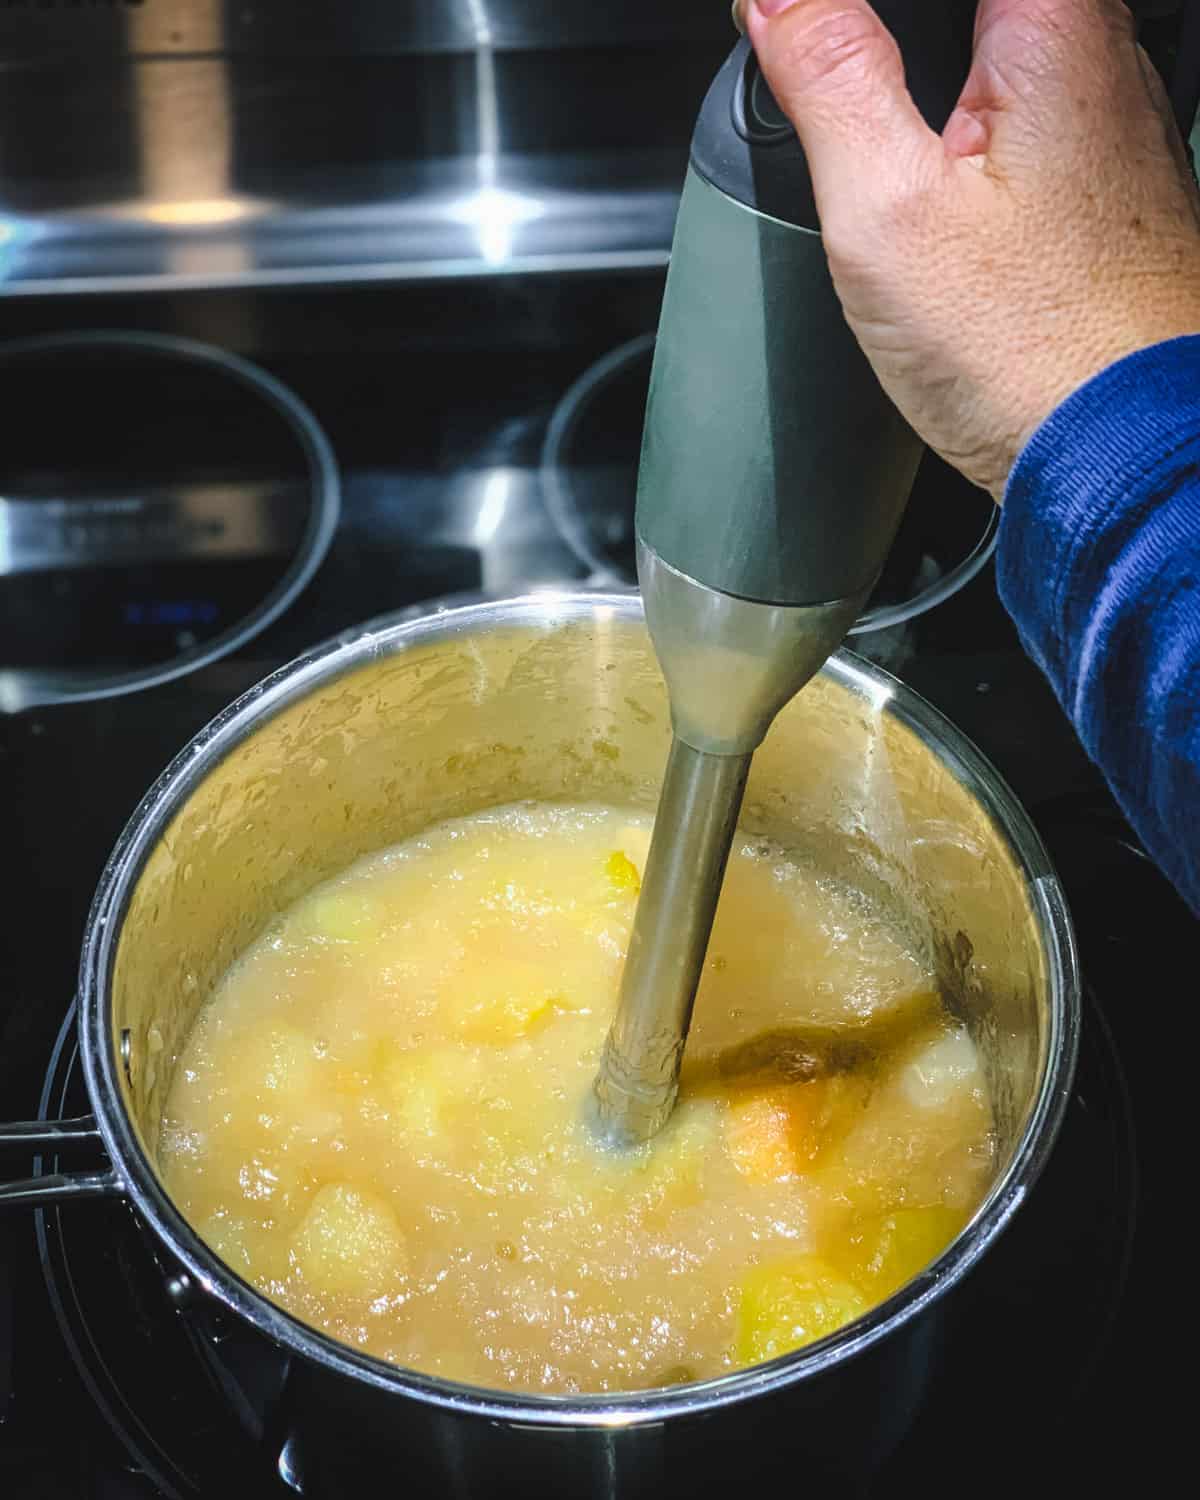 a women's hand using an immersion blender to blend the apples in a pot